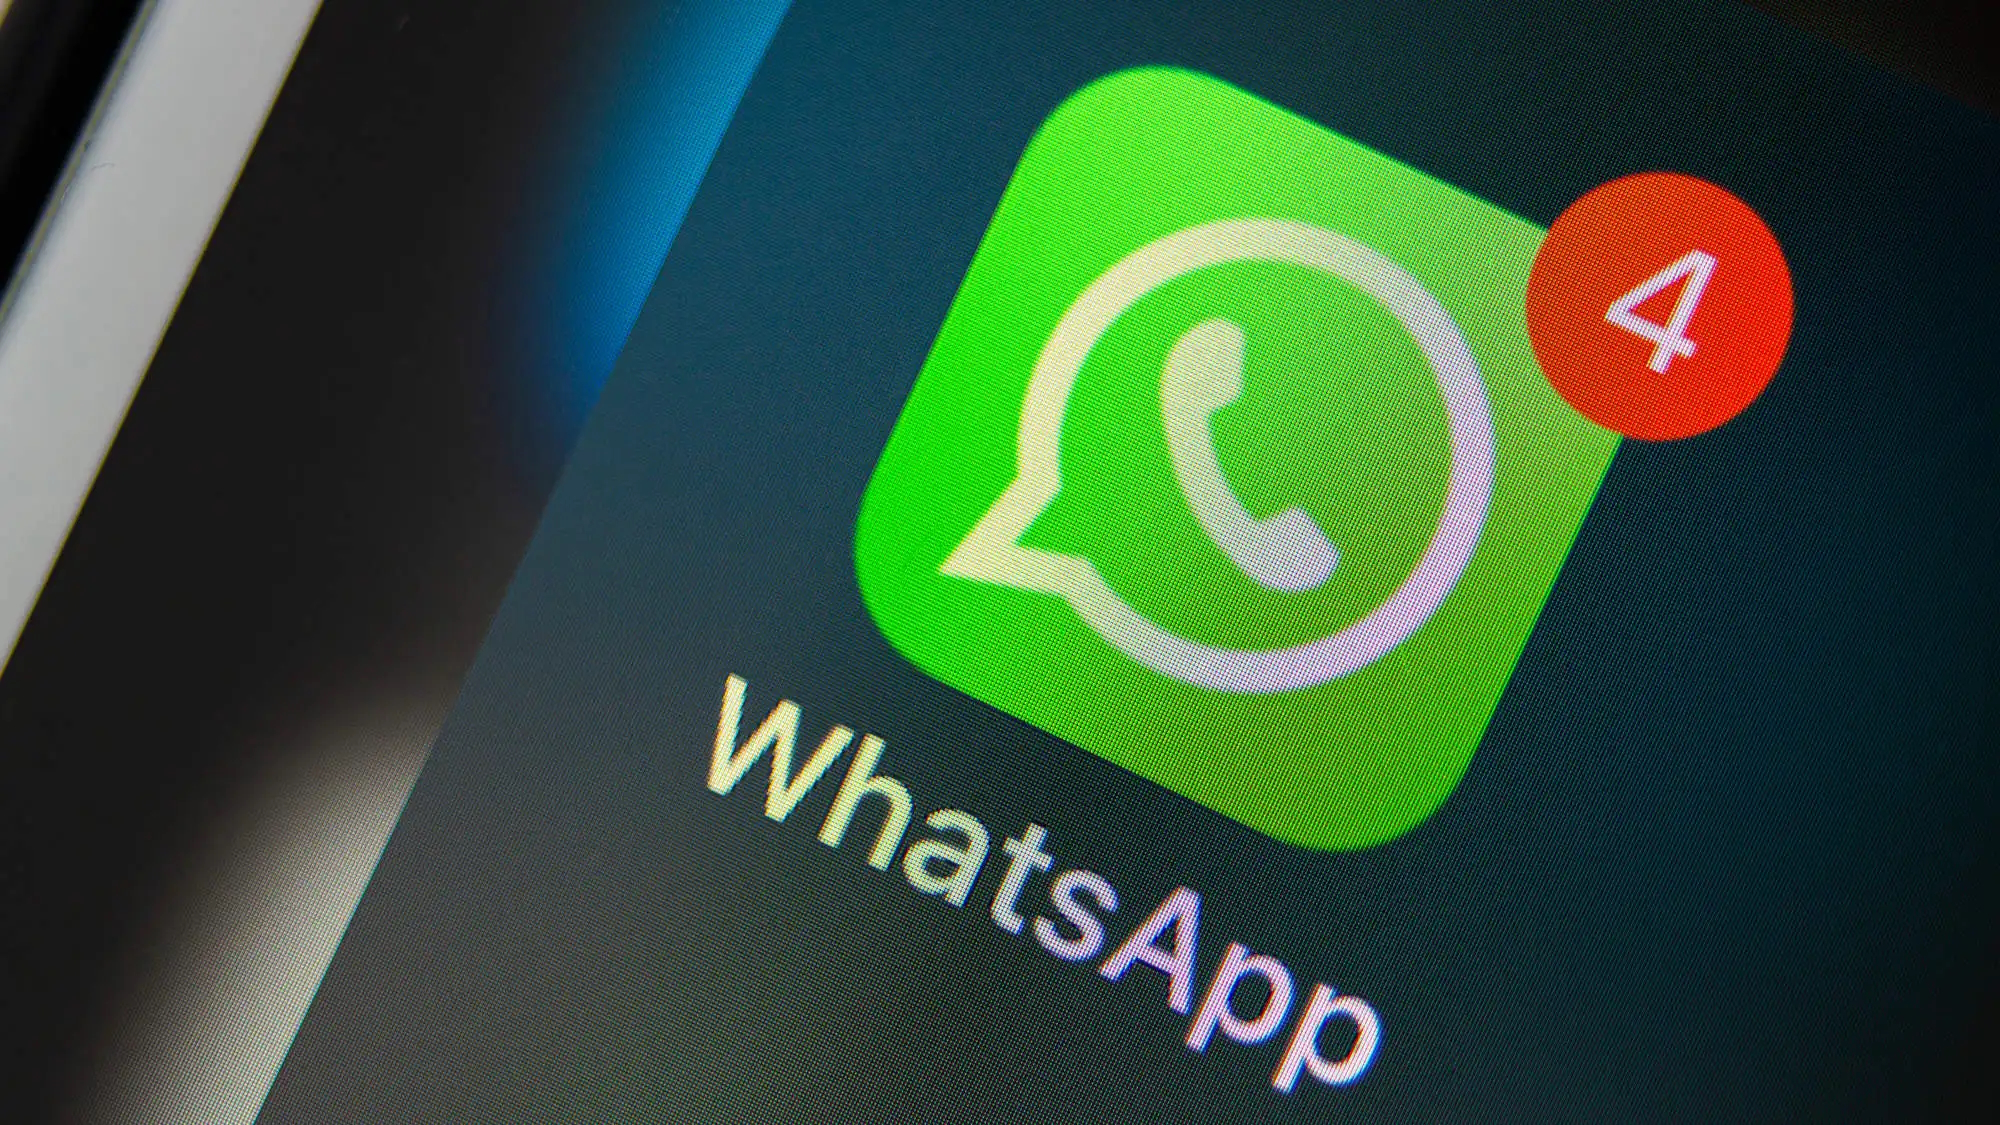 WhatsApp will finally let you call people without saving their number soon